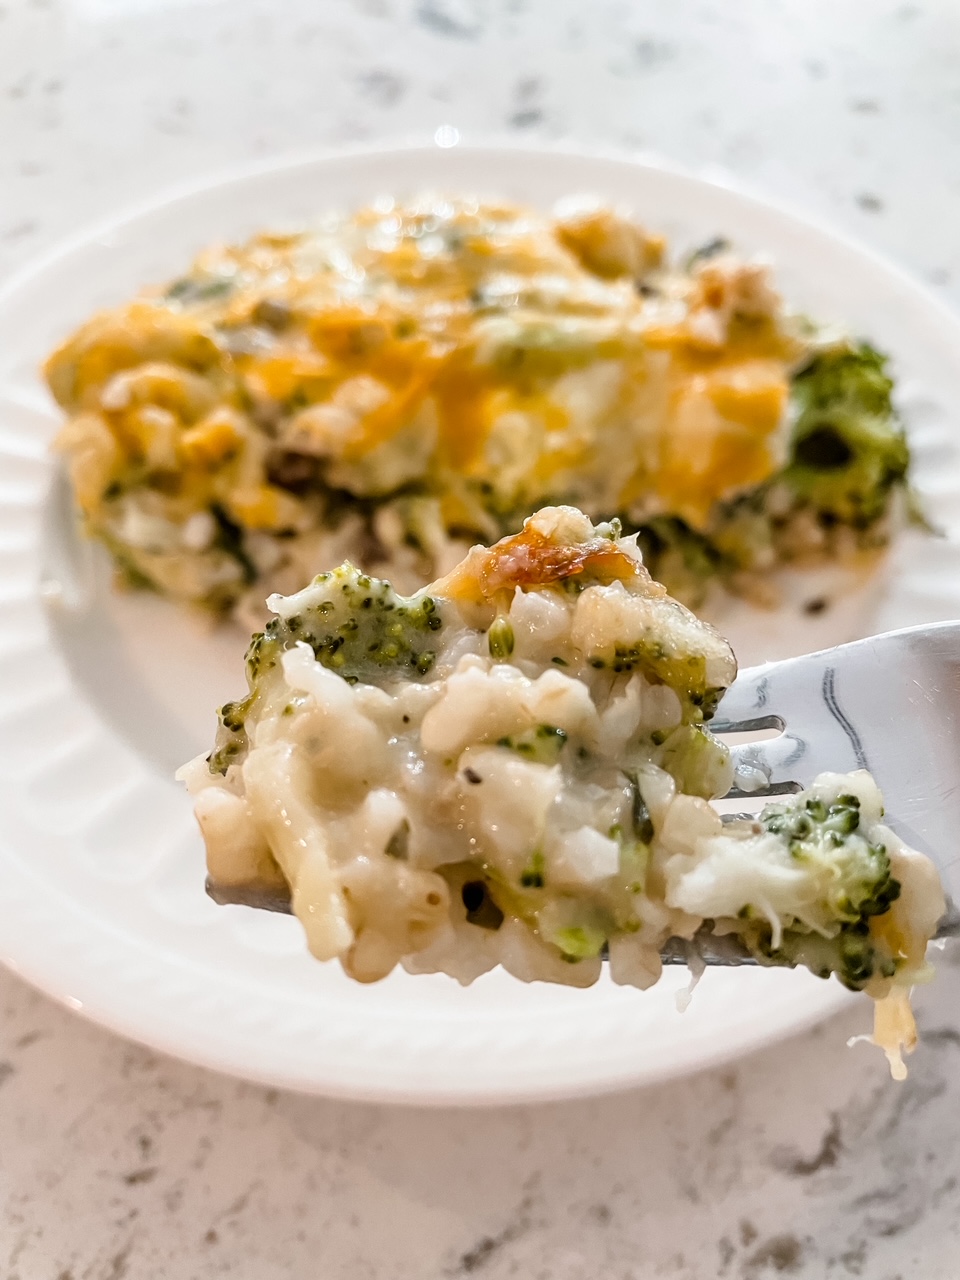 Chicken-And-Rice Bake With Broccolini Recipe